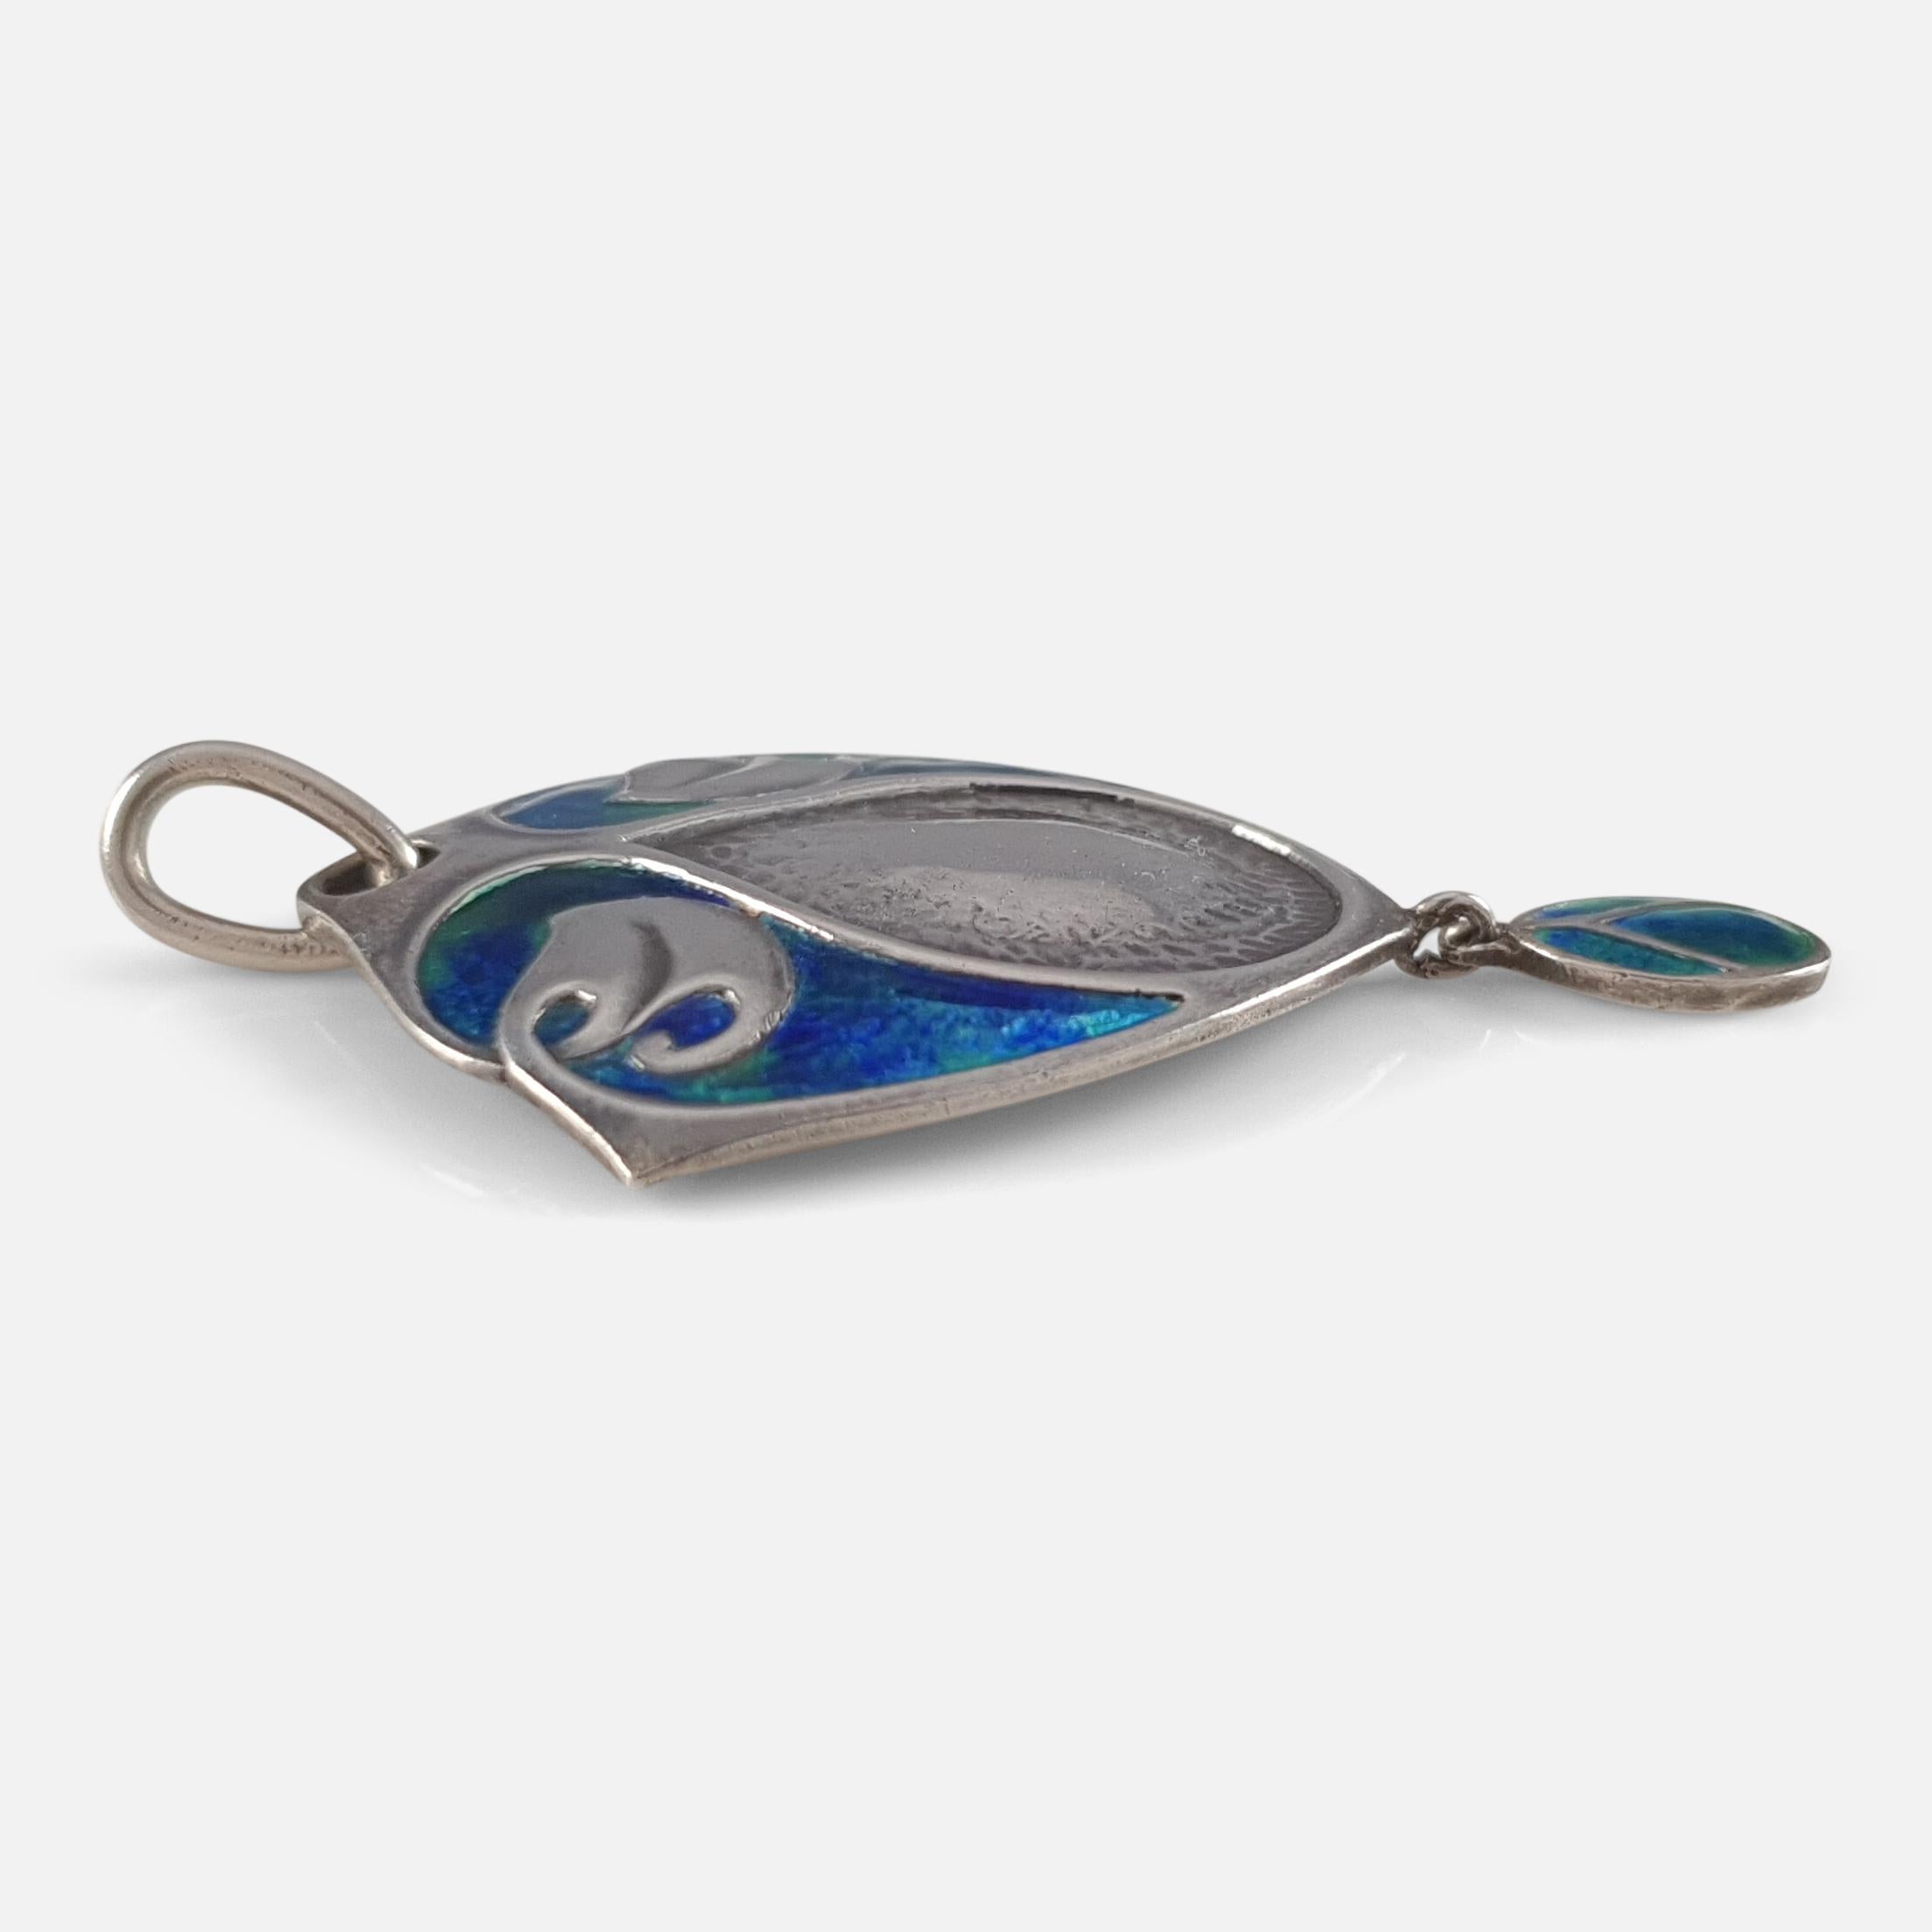 Arts and Crafts Murrle Bennett & Co Arts & Crafts Silver and Enamel Drop Pendant, circa 1905